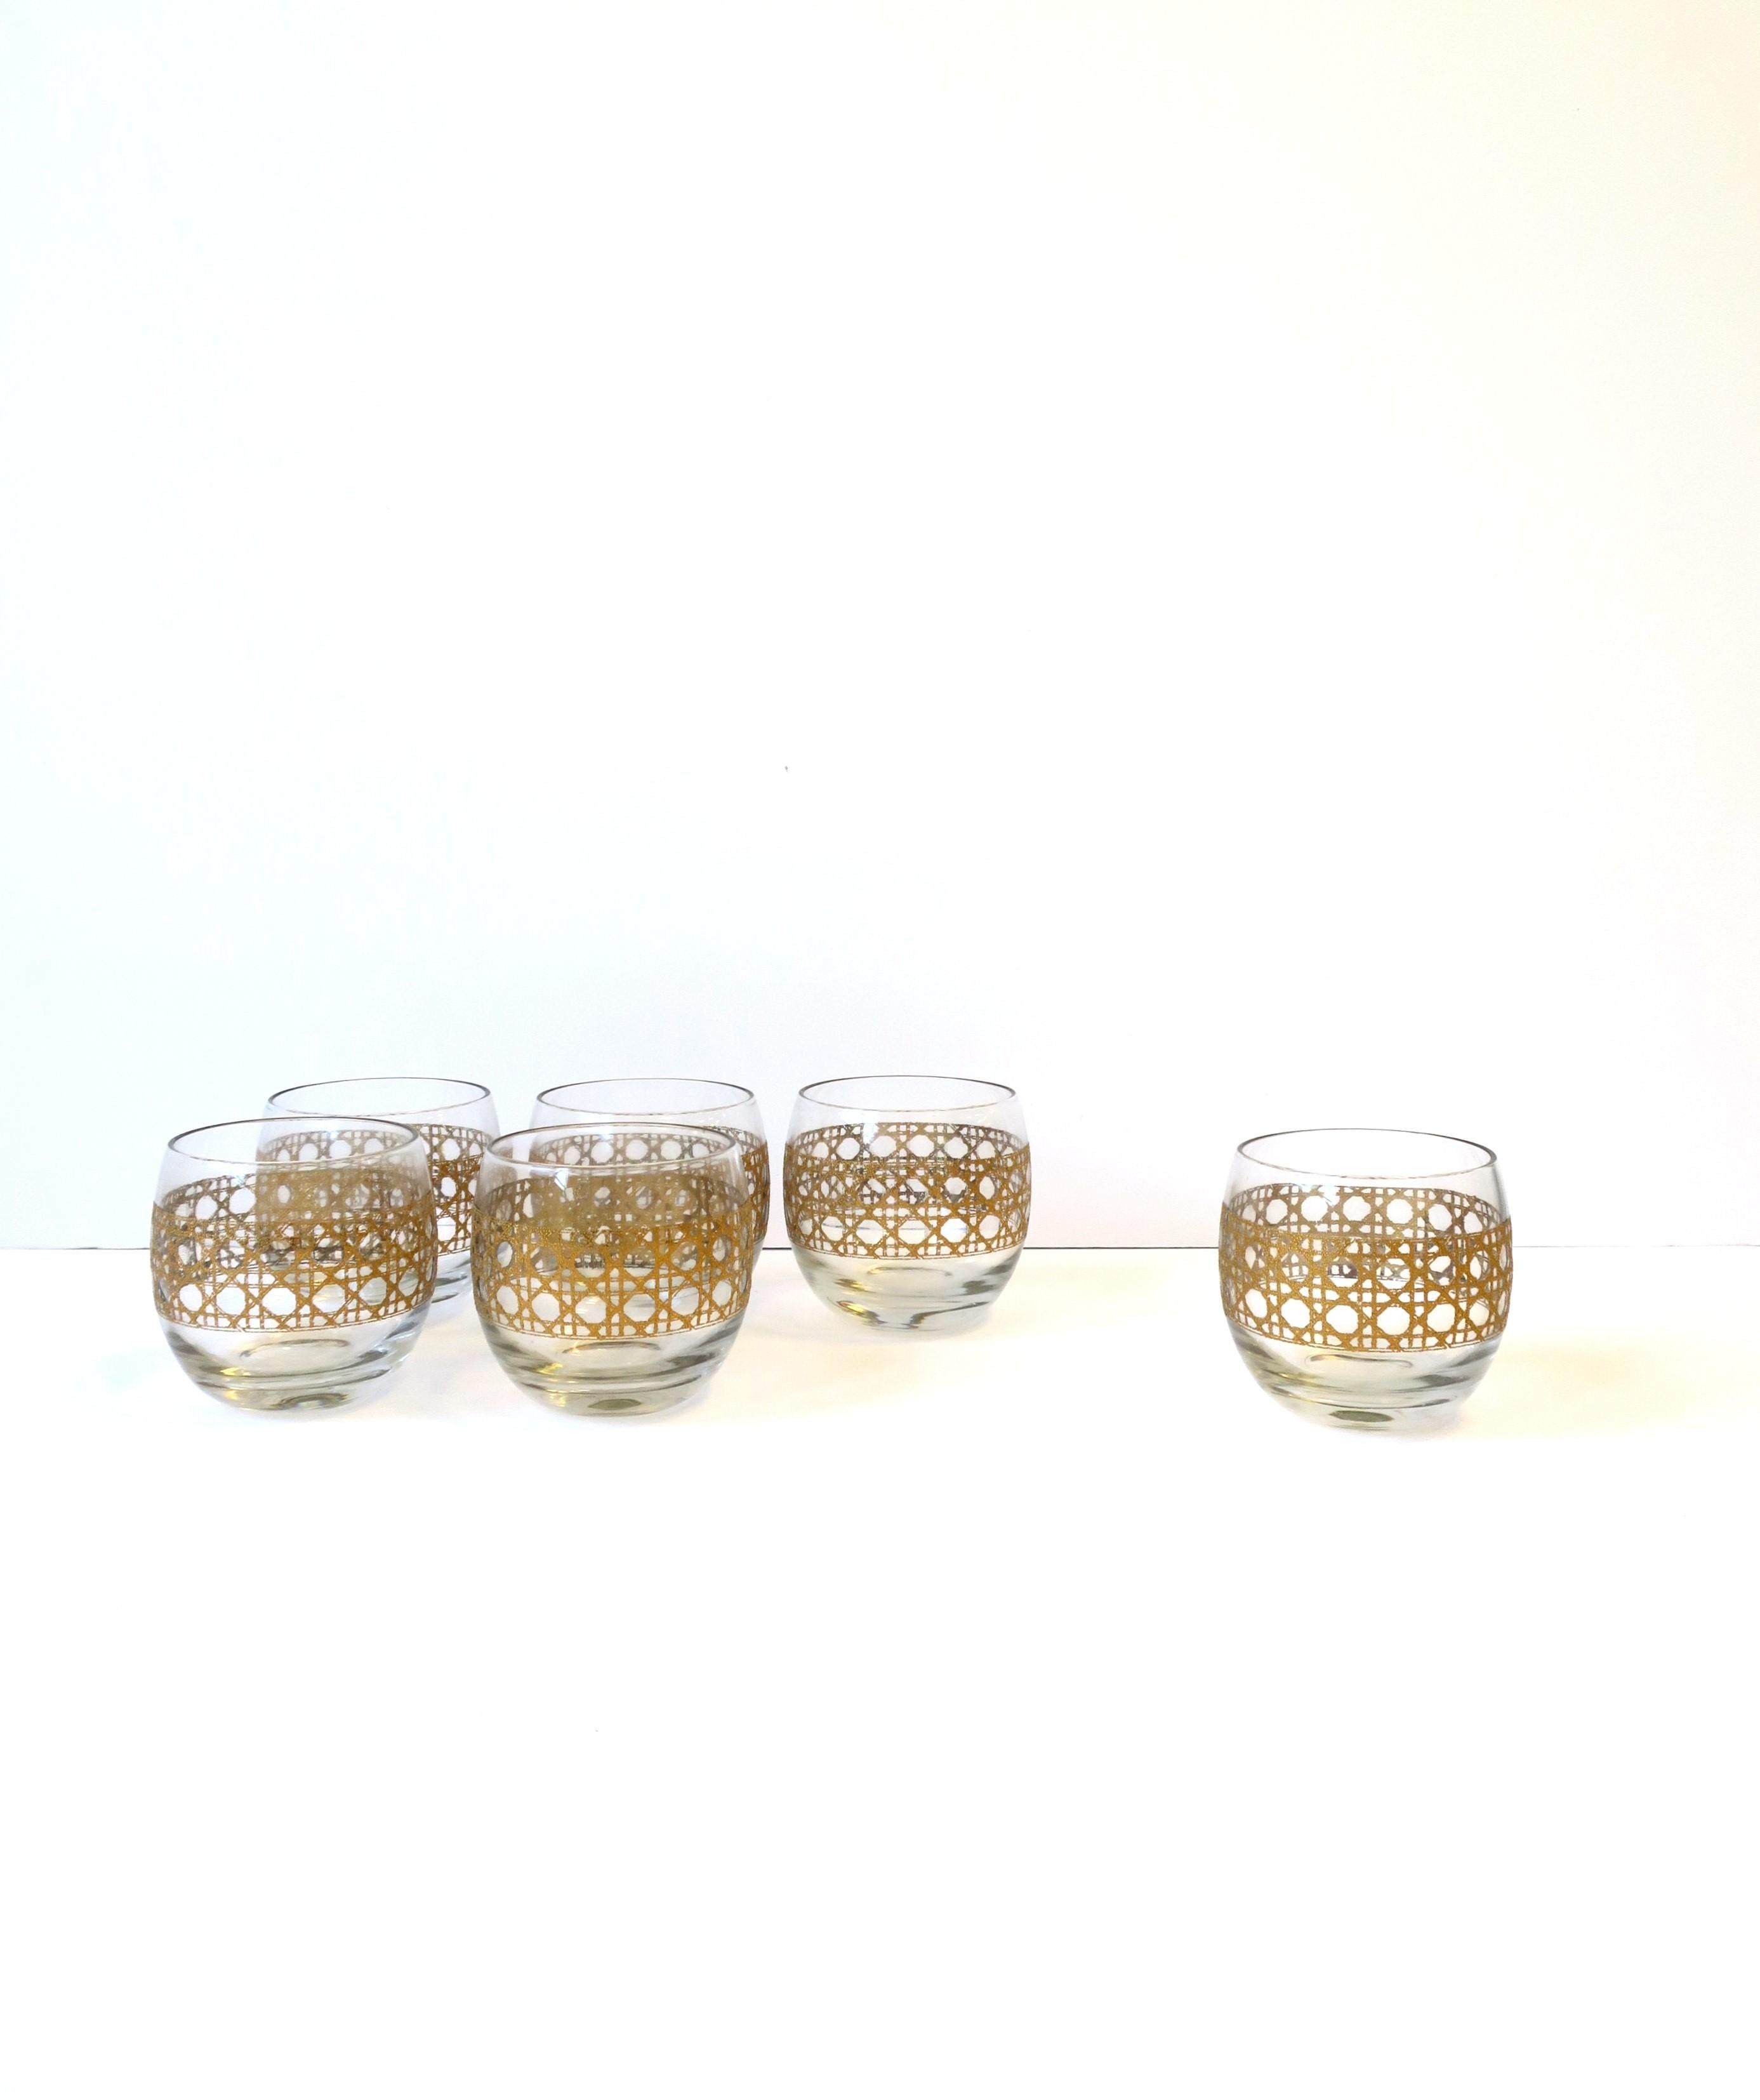 A set of six (6) gold wicker 'cane' round tumbler rocks' cocktail glasses, circa 1960s, mid-20th century, USA. Glasses are round tumbler rocks' cocktails glasses with a gold wicker cane pattern around exterior. A great set for any bar, bar cart,